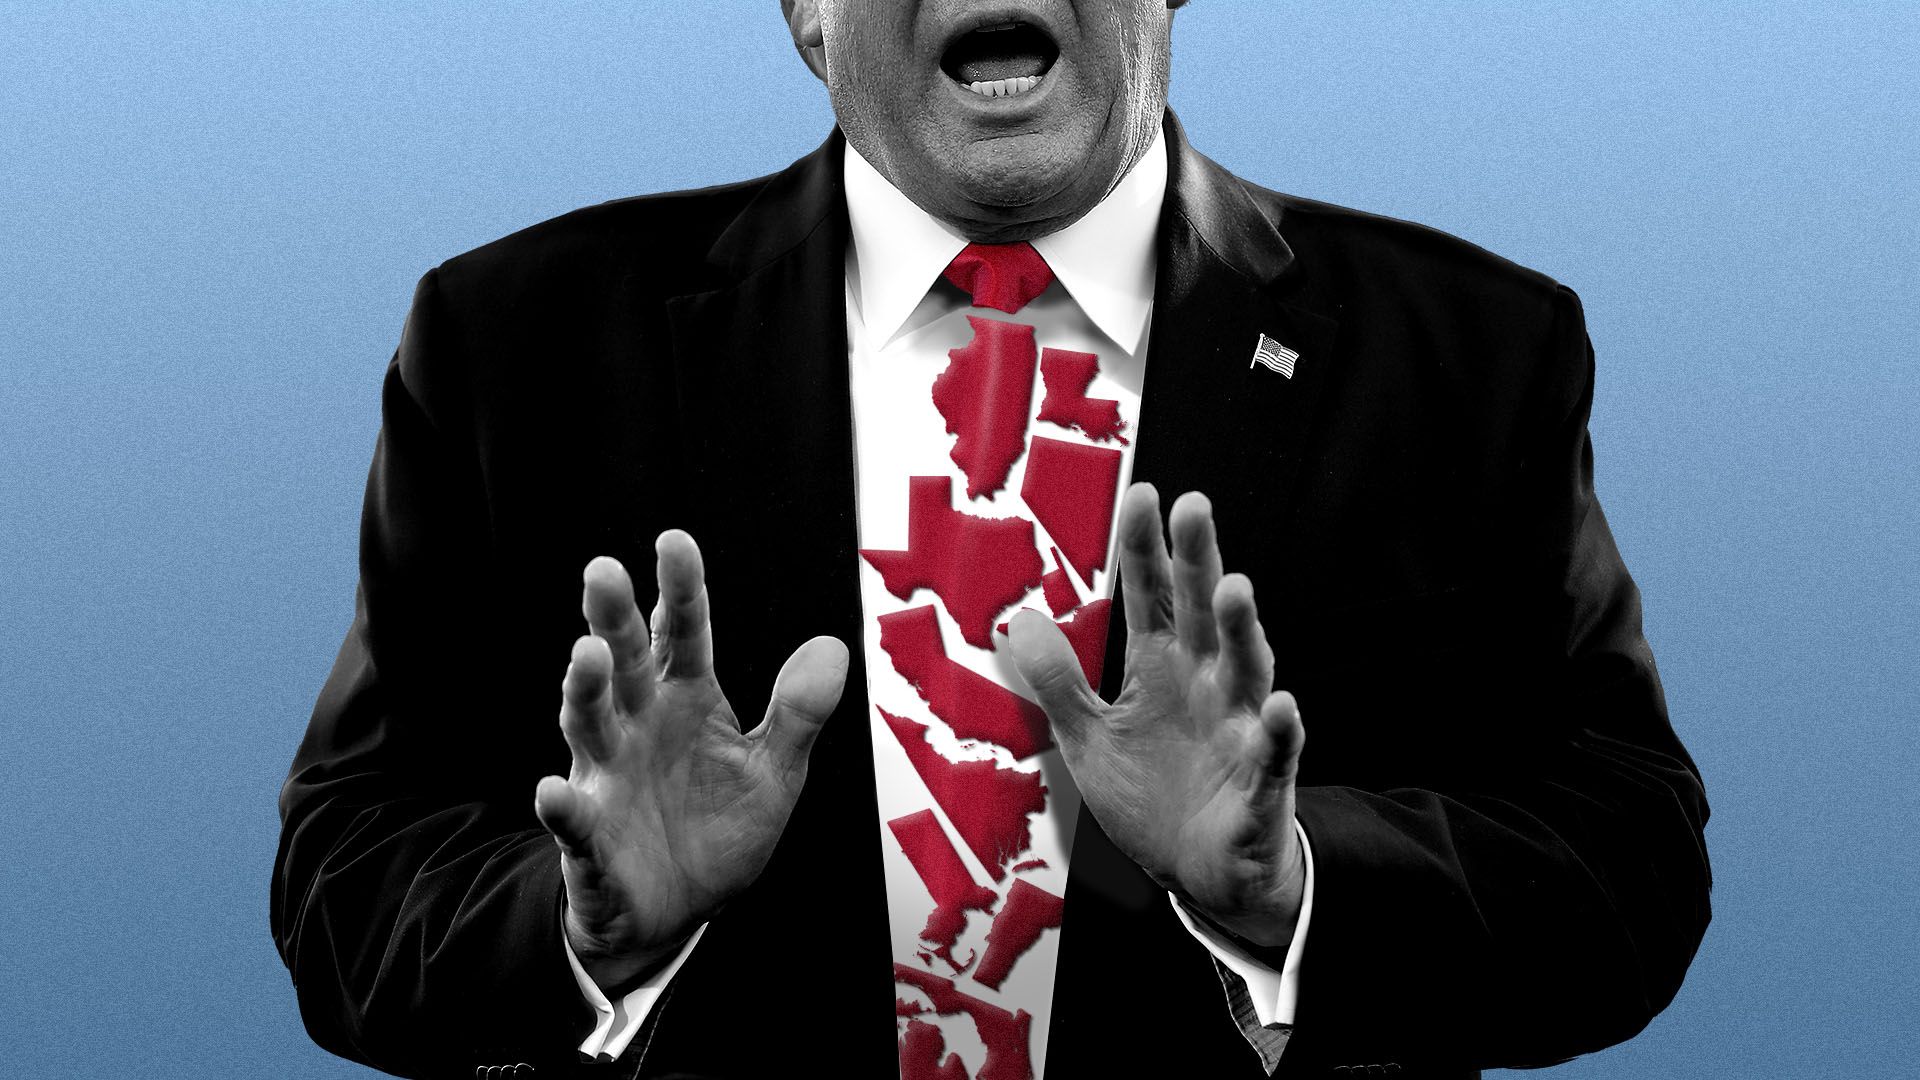 Illustration of President Trump with a tie made out of different states